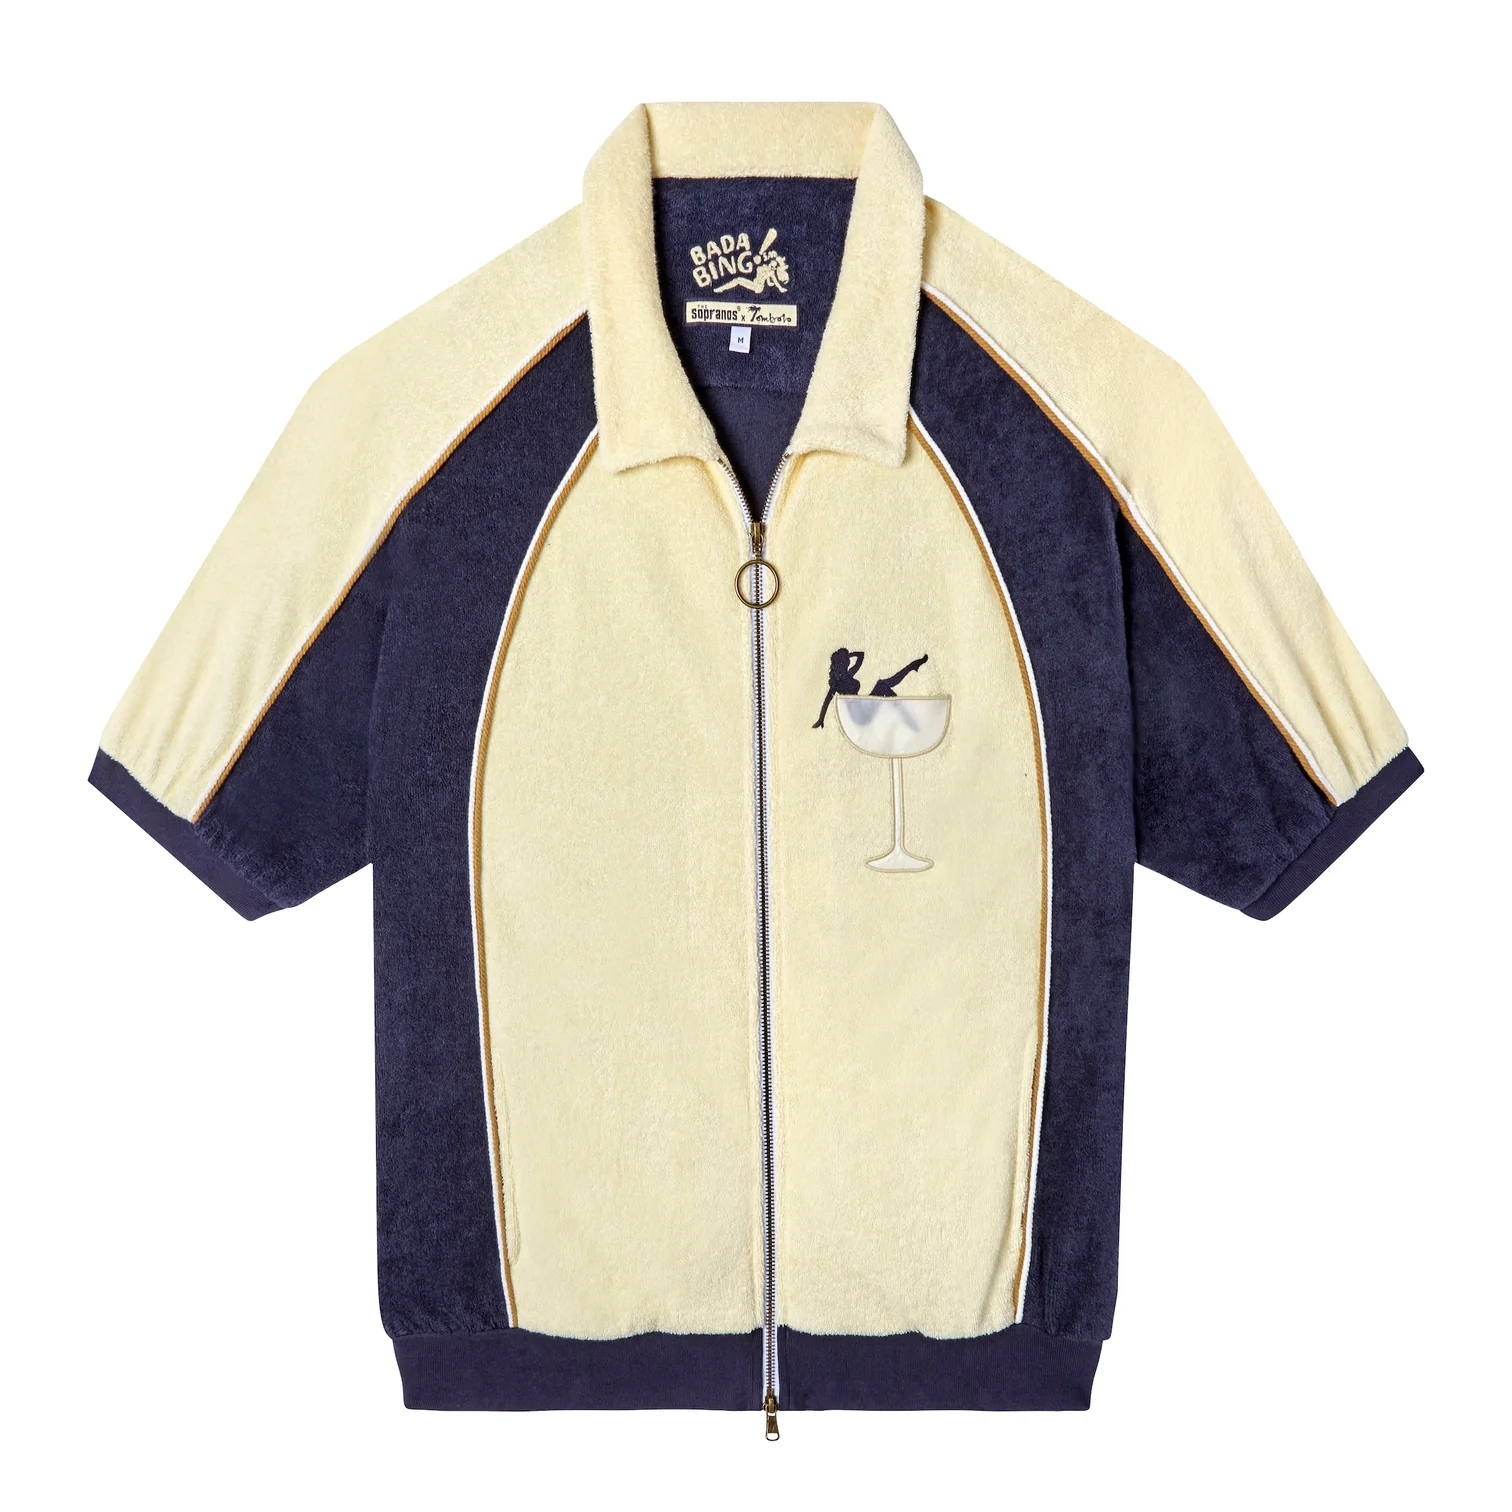 Short-sleeved zip-up shirt with a martini glass embroidery on the front. It features a retro design with contrasting panels